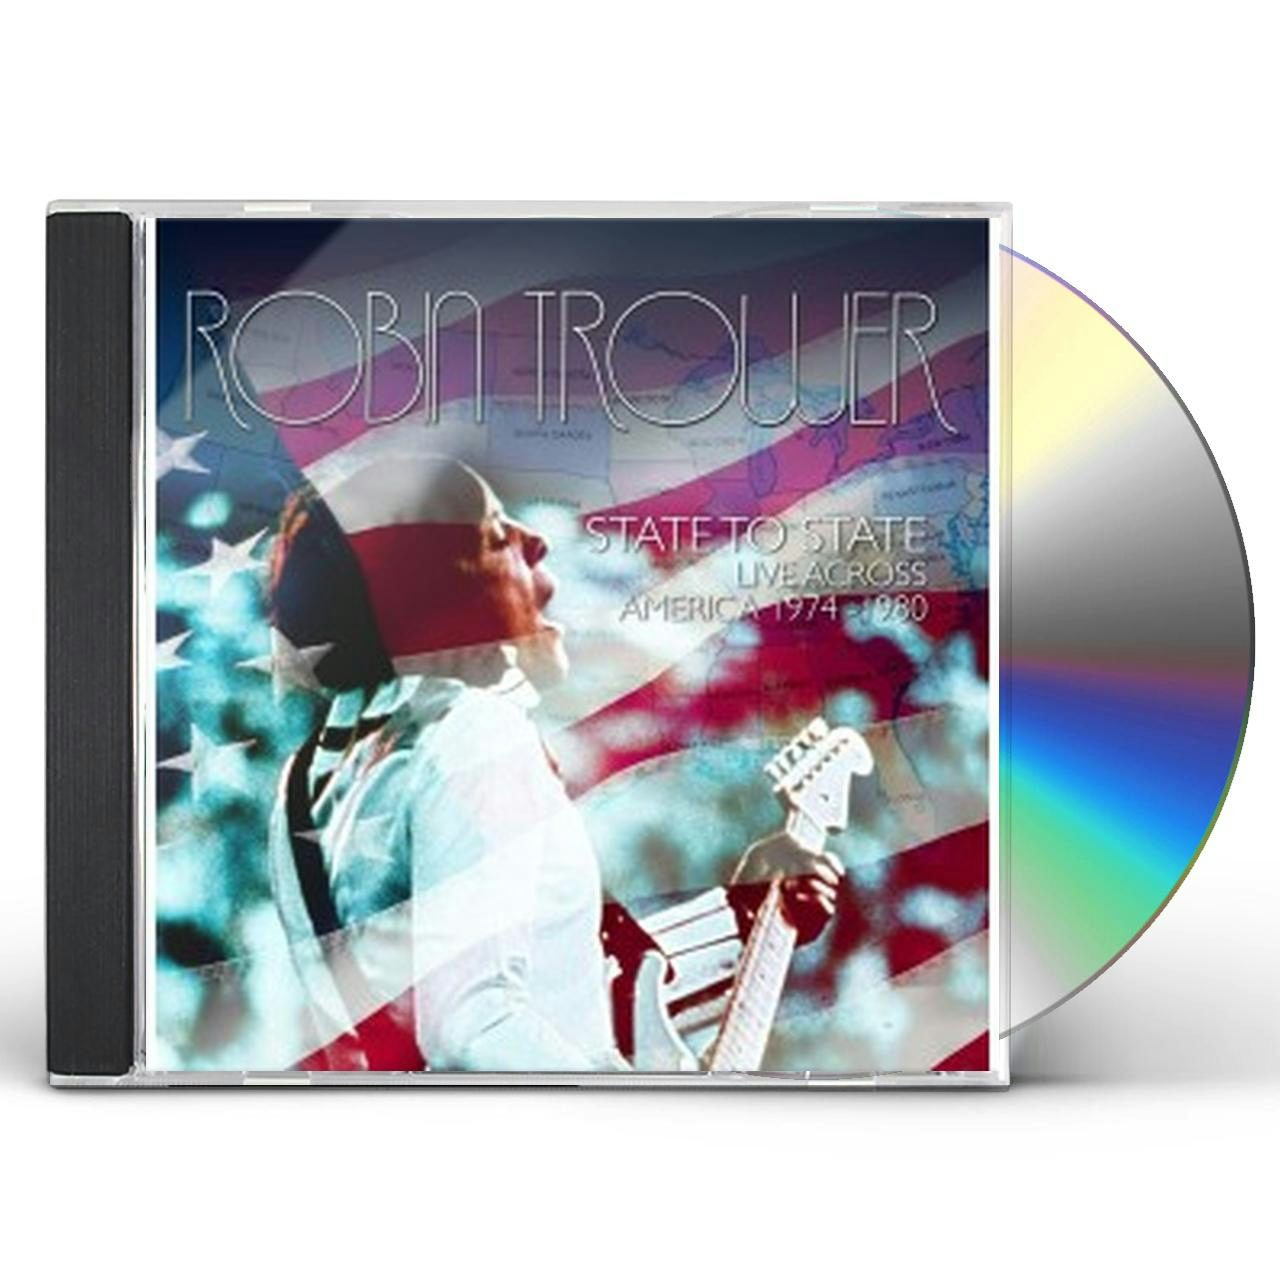 download robin trower united state of mind for free